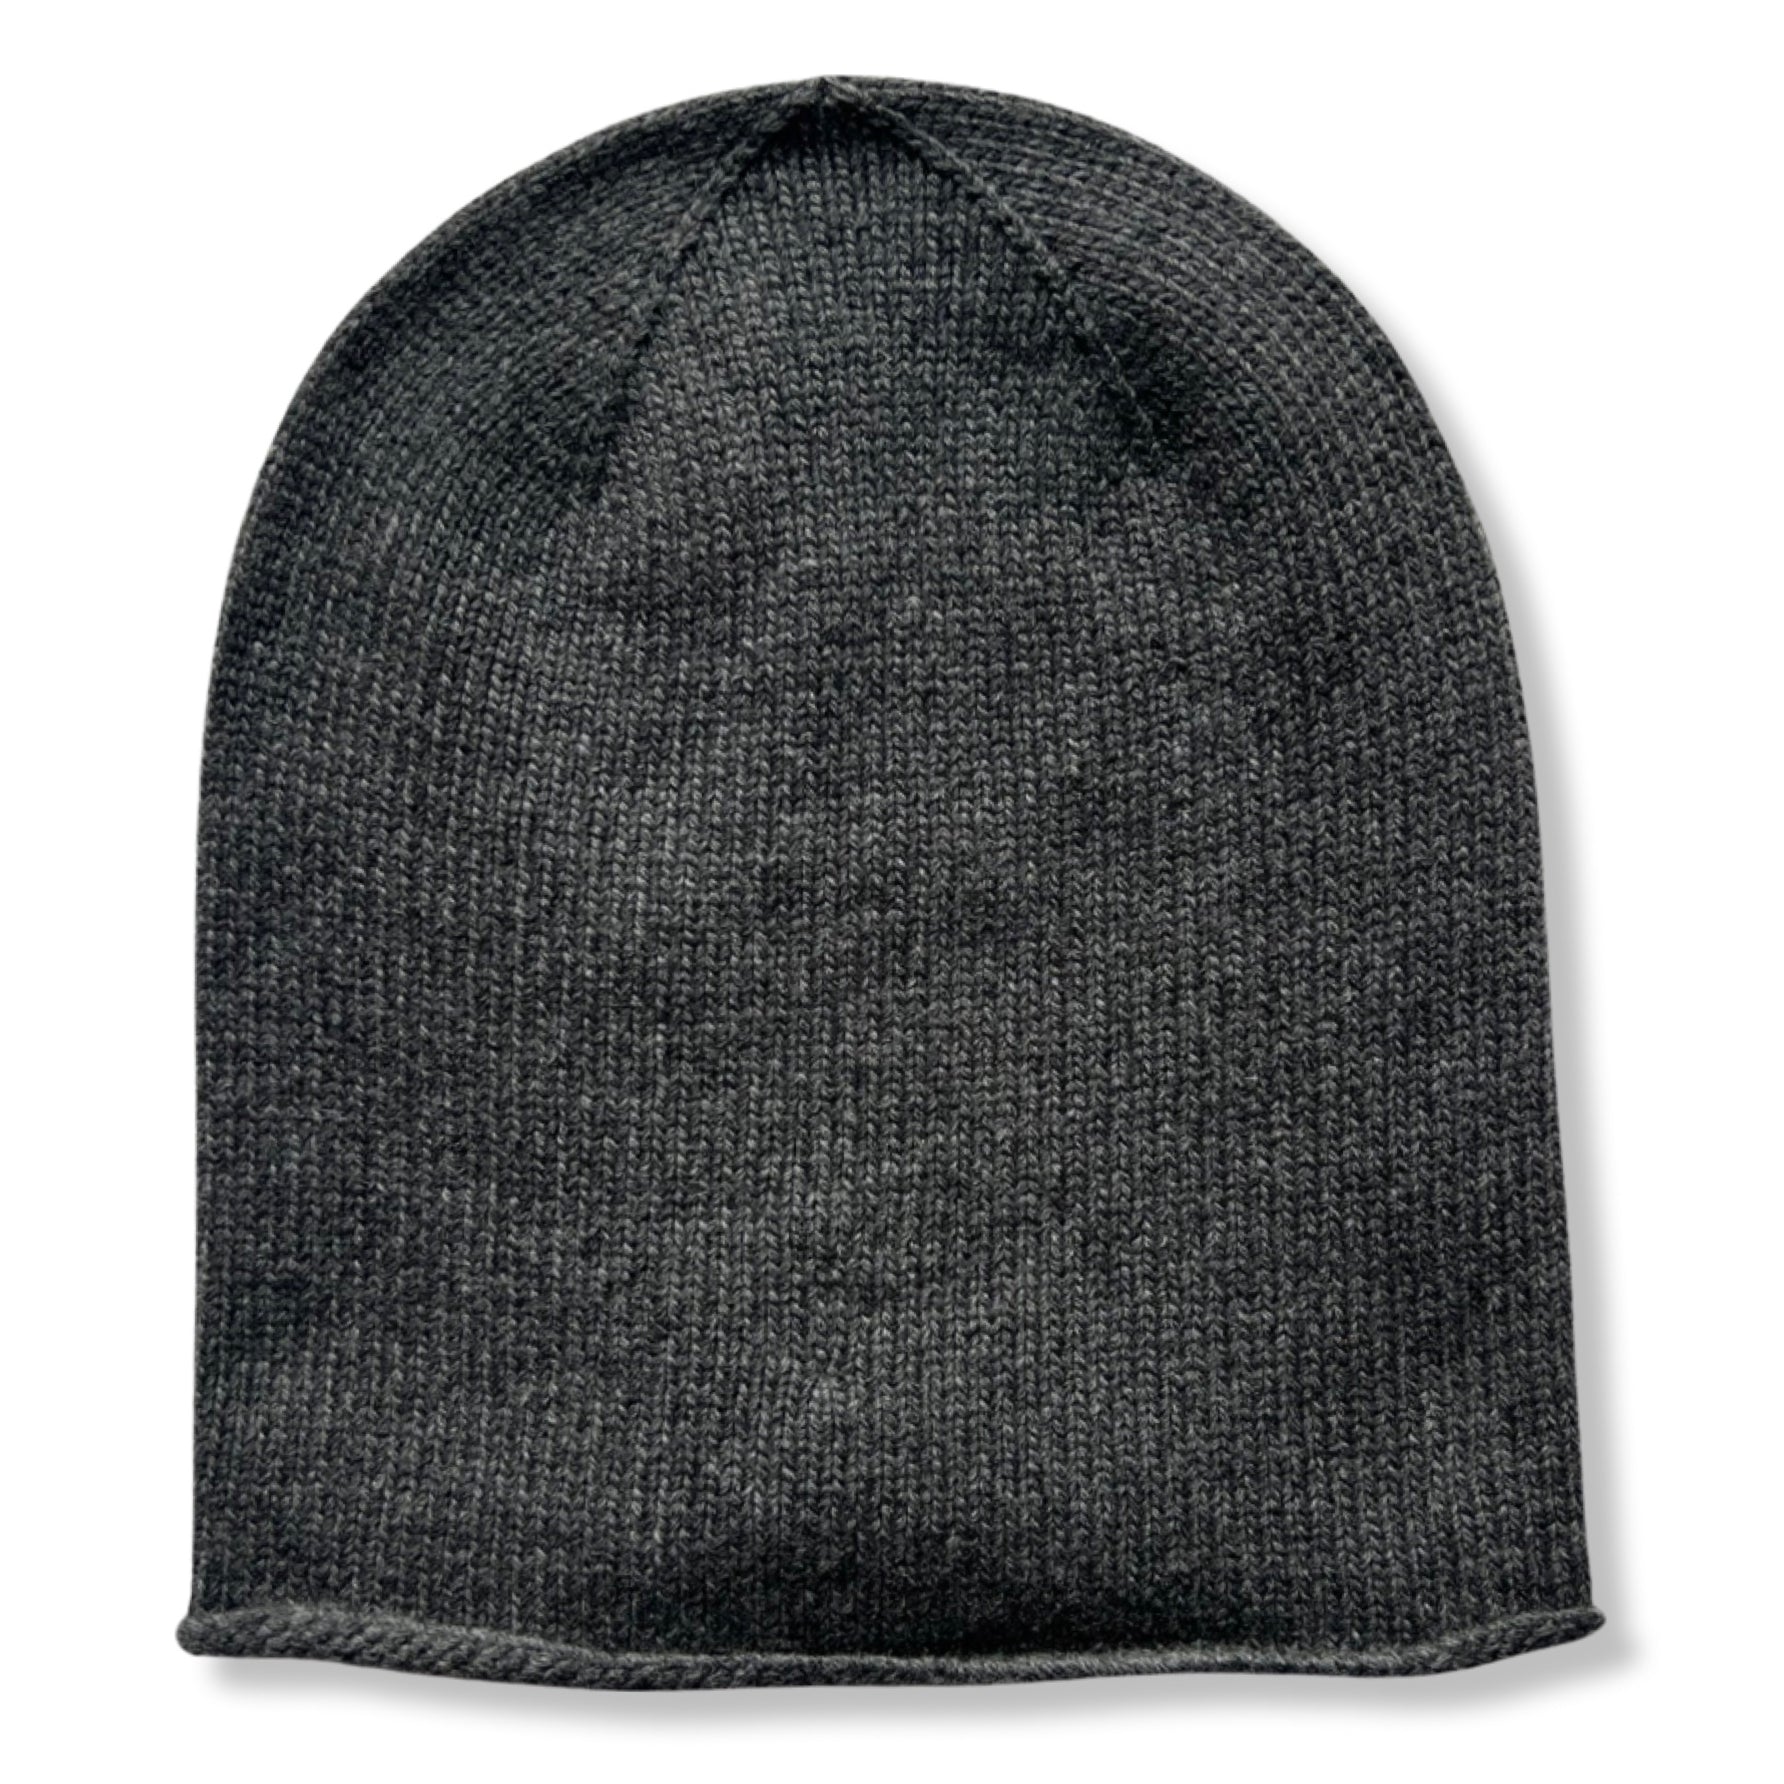 Rolled Edge Cashmere Beanie, Hats, Hickman & Bousfied - Hickman & Bousfield, Safari and Travel Clothing